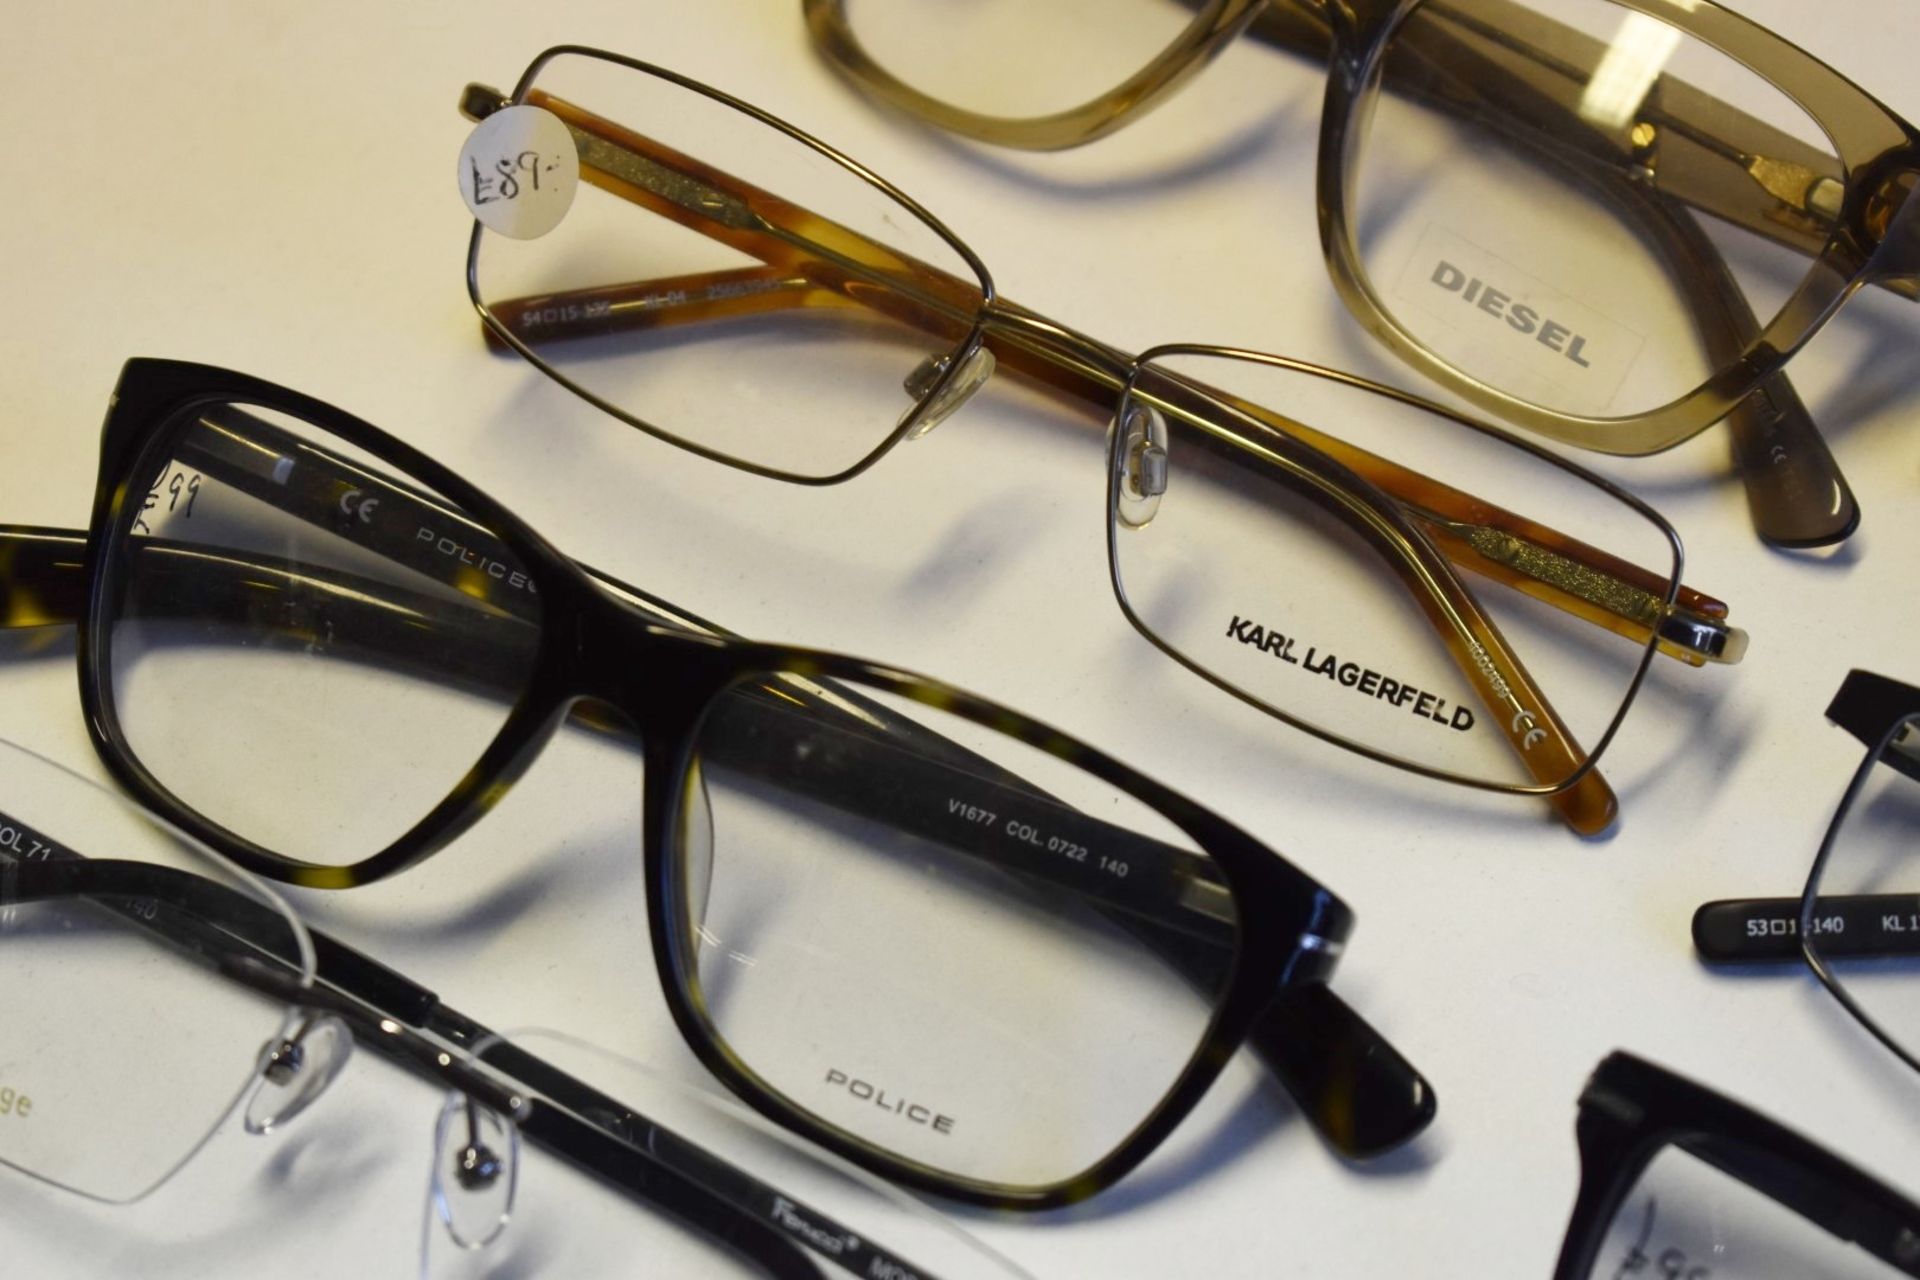 10 x Assorted Pairs of Designer Spectacle Eye Glasses - Ex Display Stock - Brands Include Diesel, - Image 8 of 10